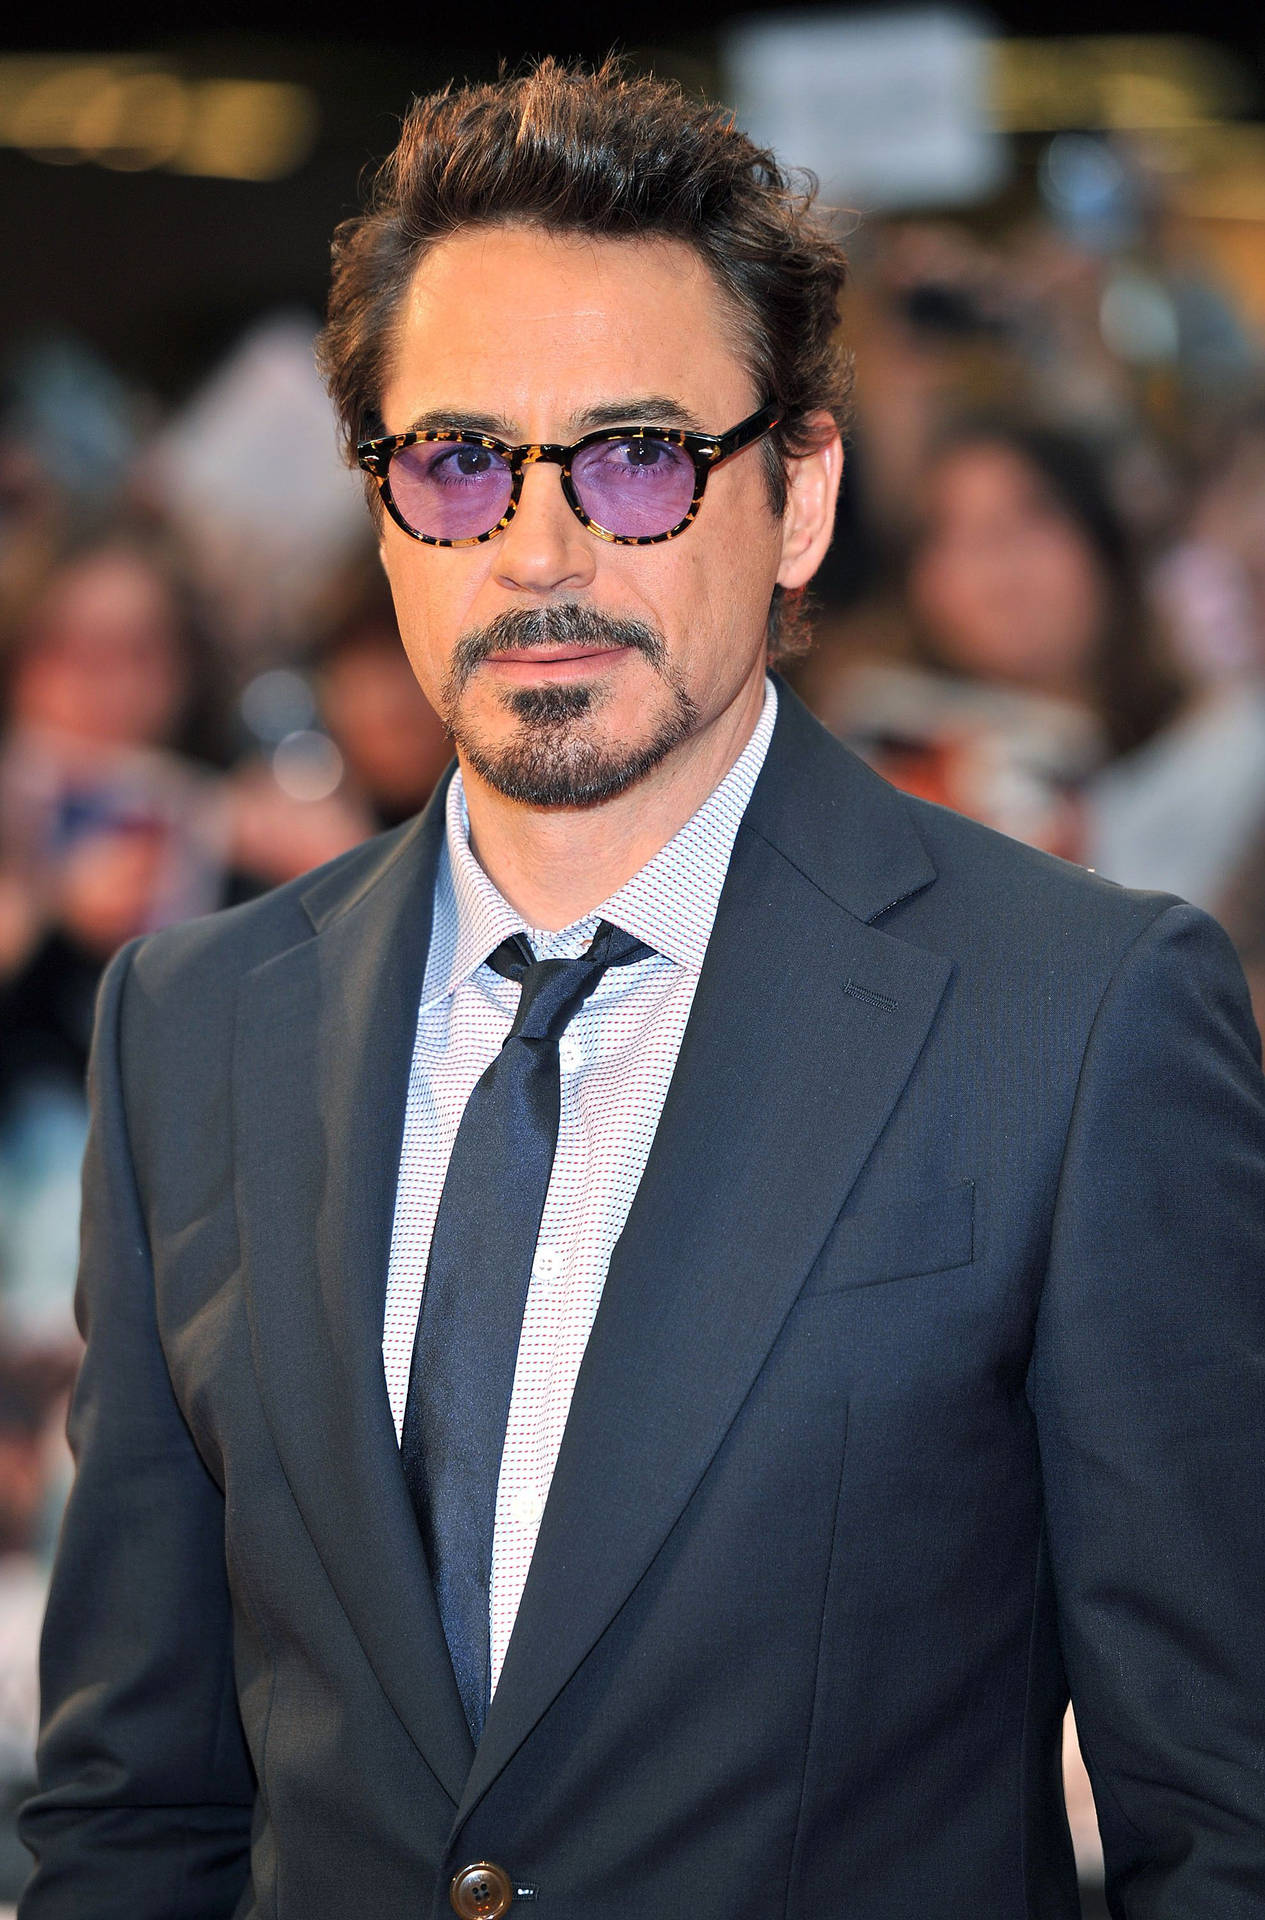 Focused Photography Robert Downey Jr. Background